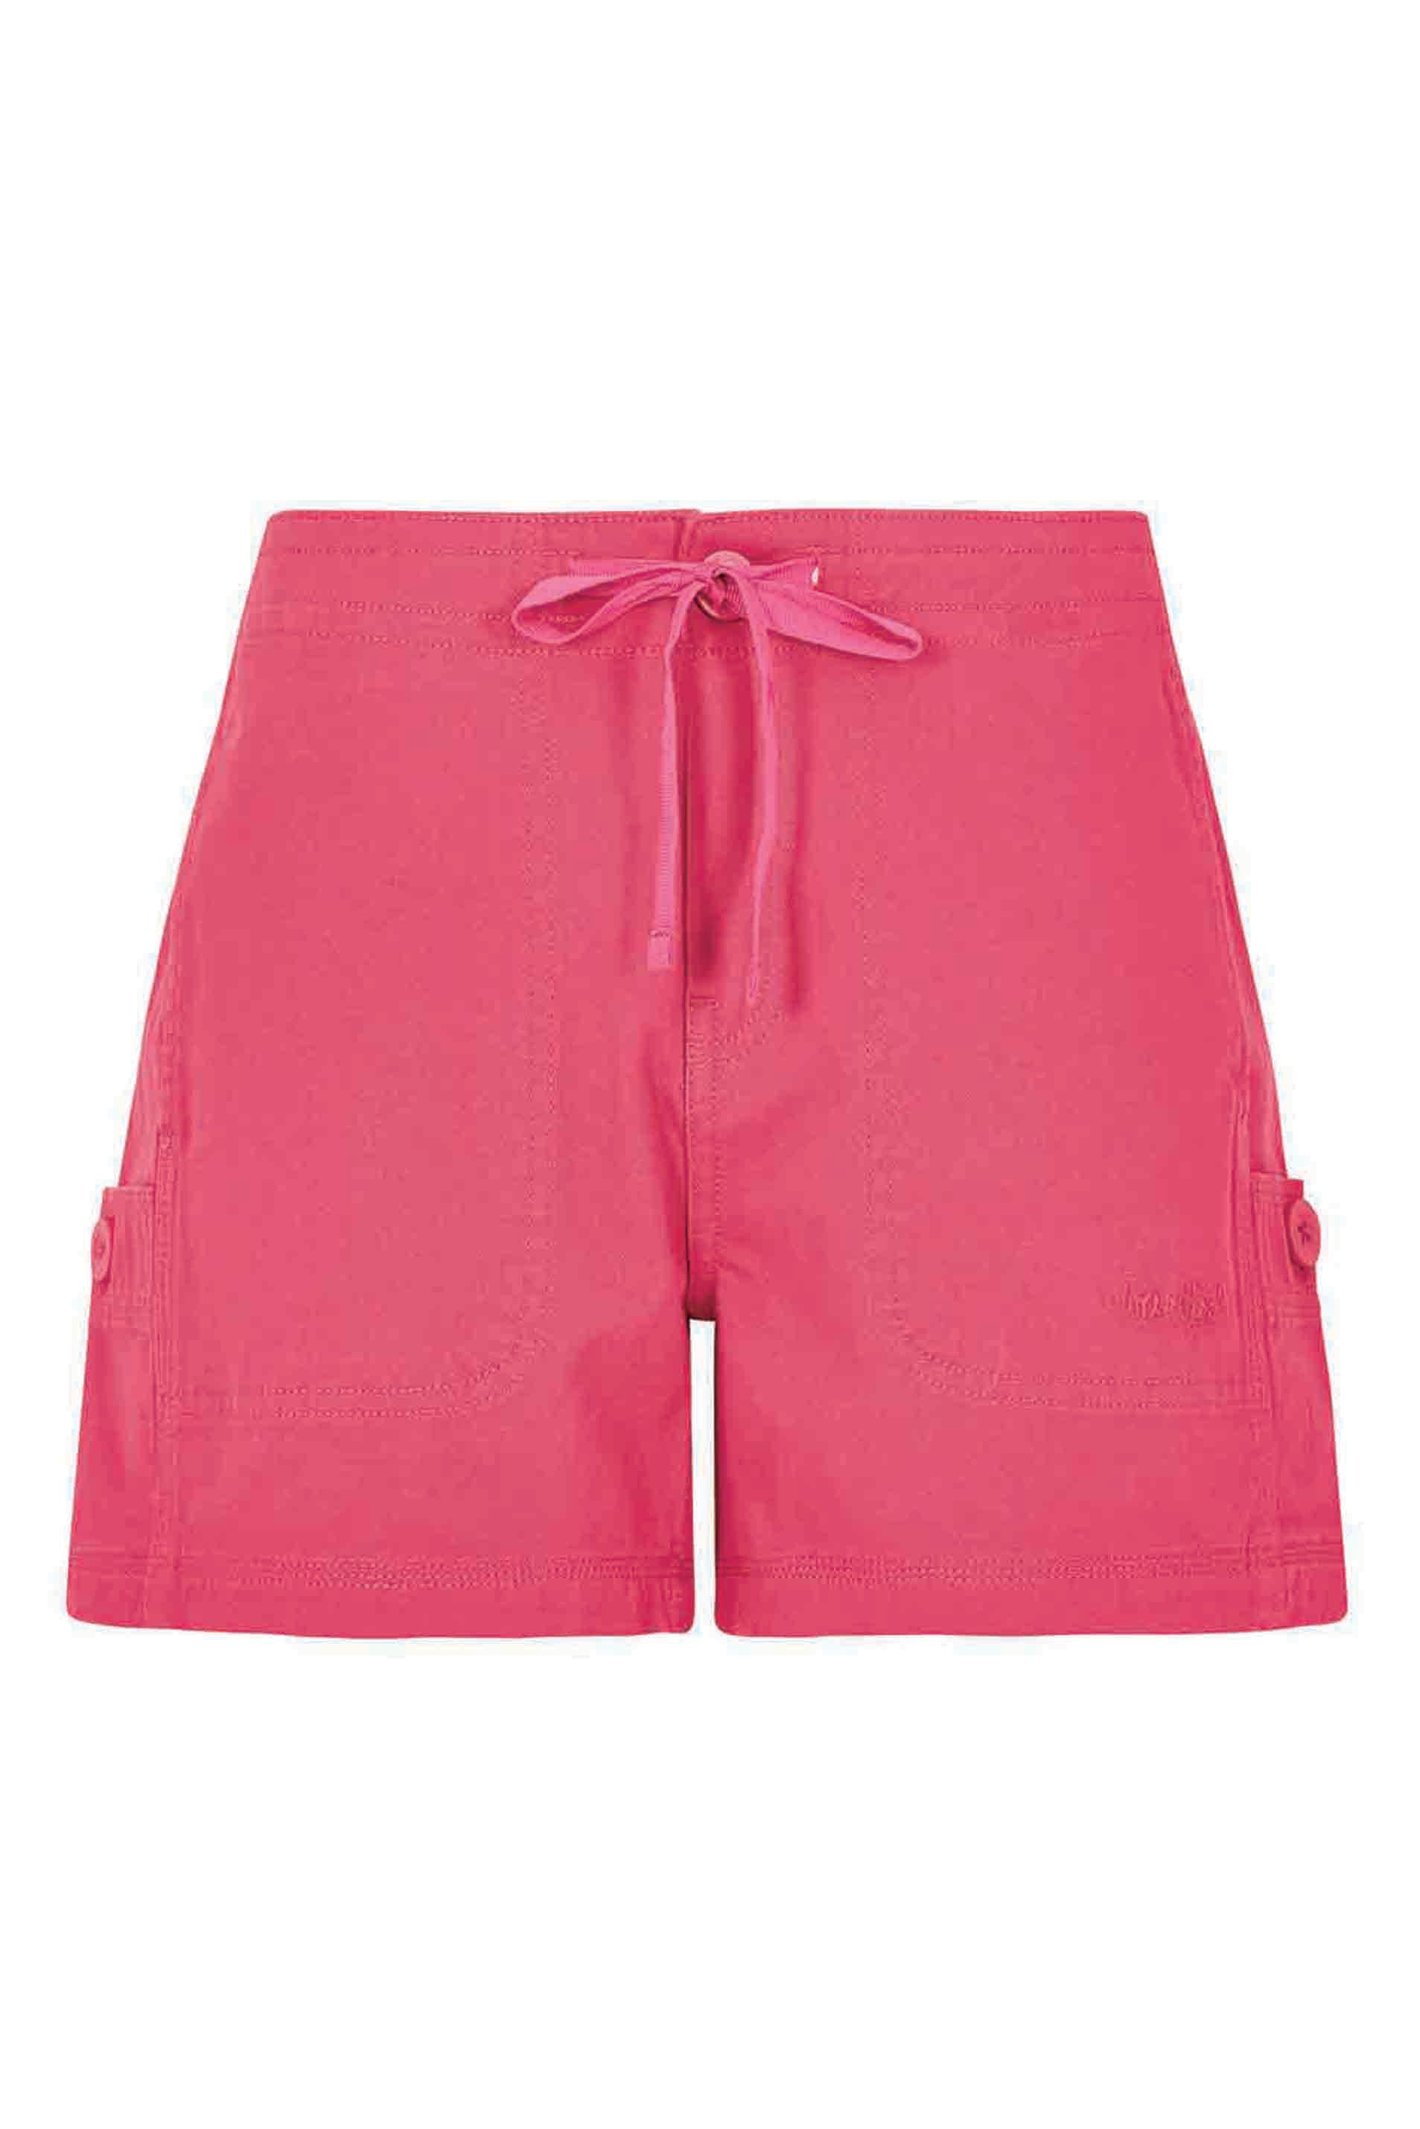 Weird Fish Willoughby Summer Shorts Hot Pink Size 12